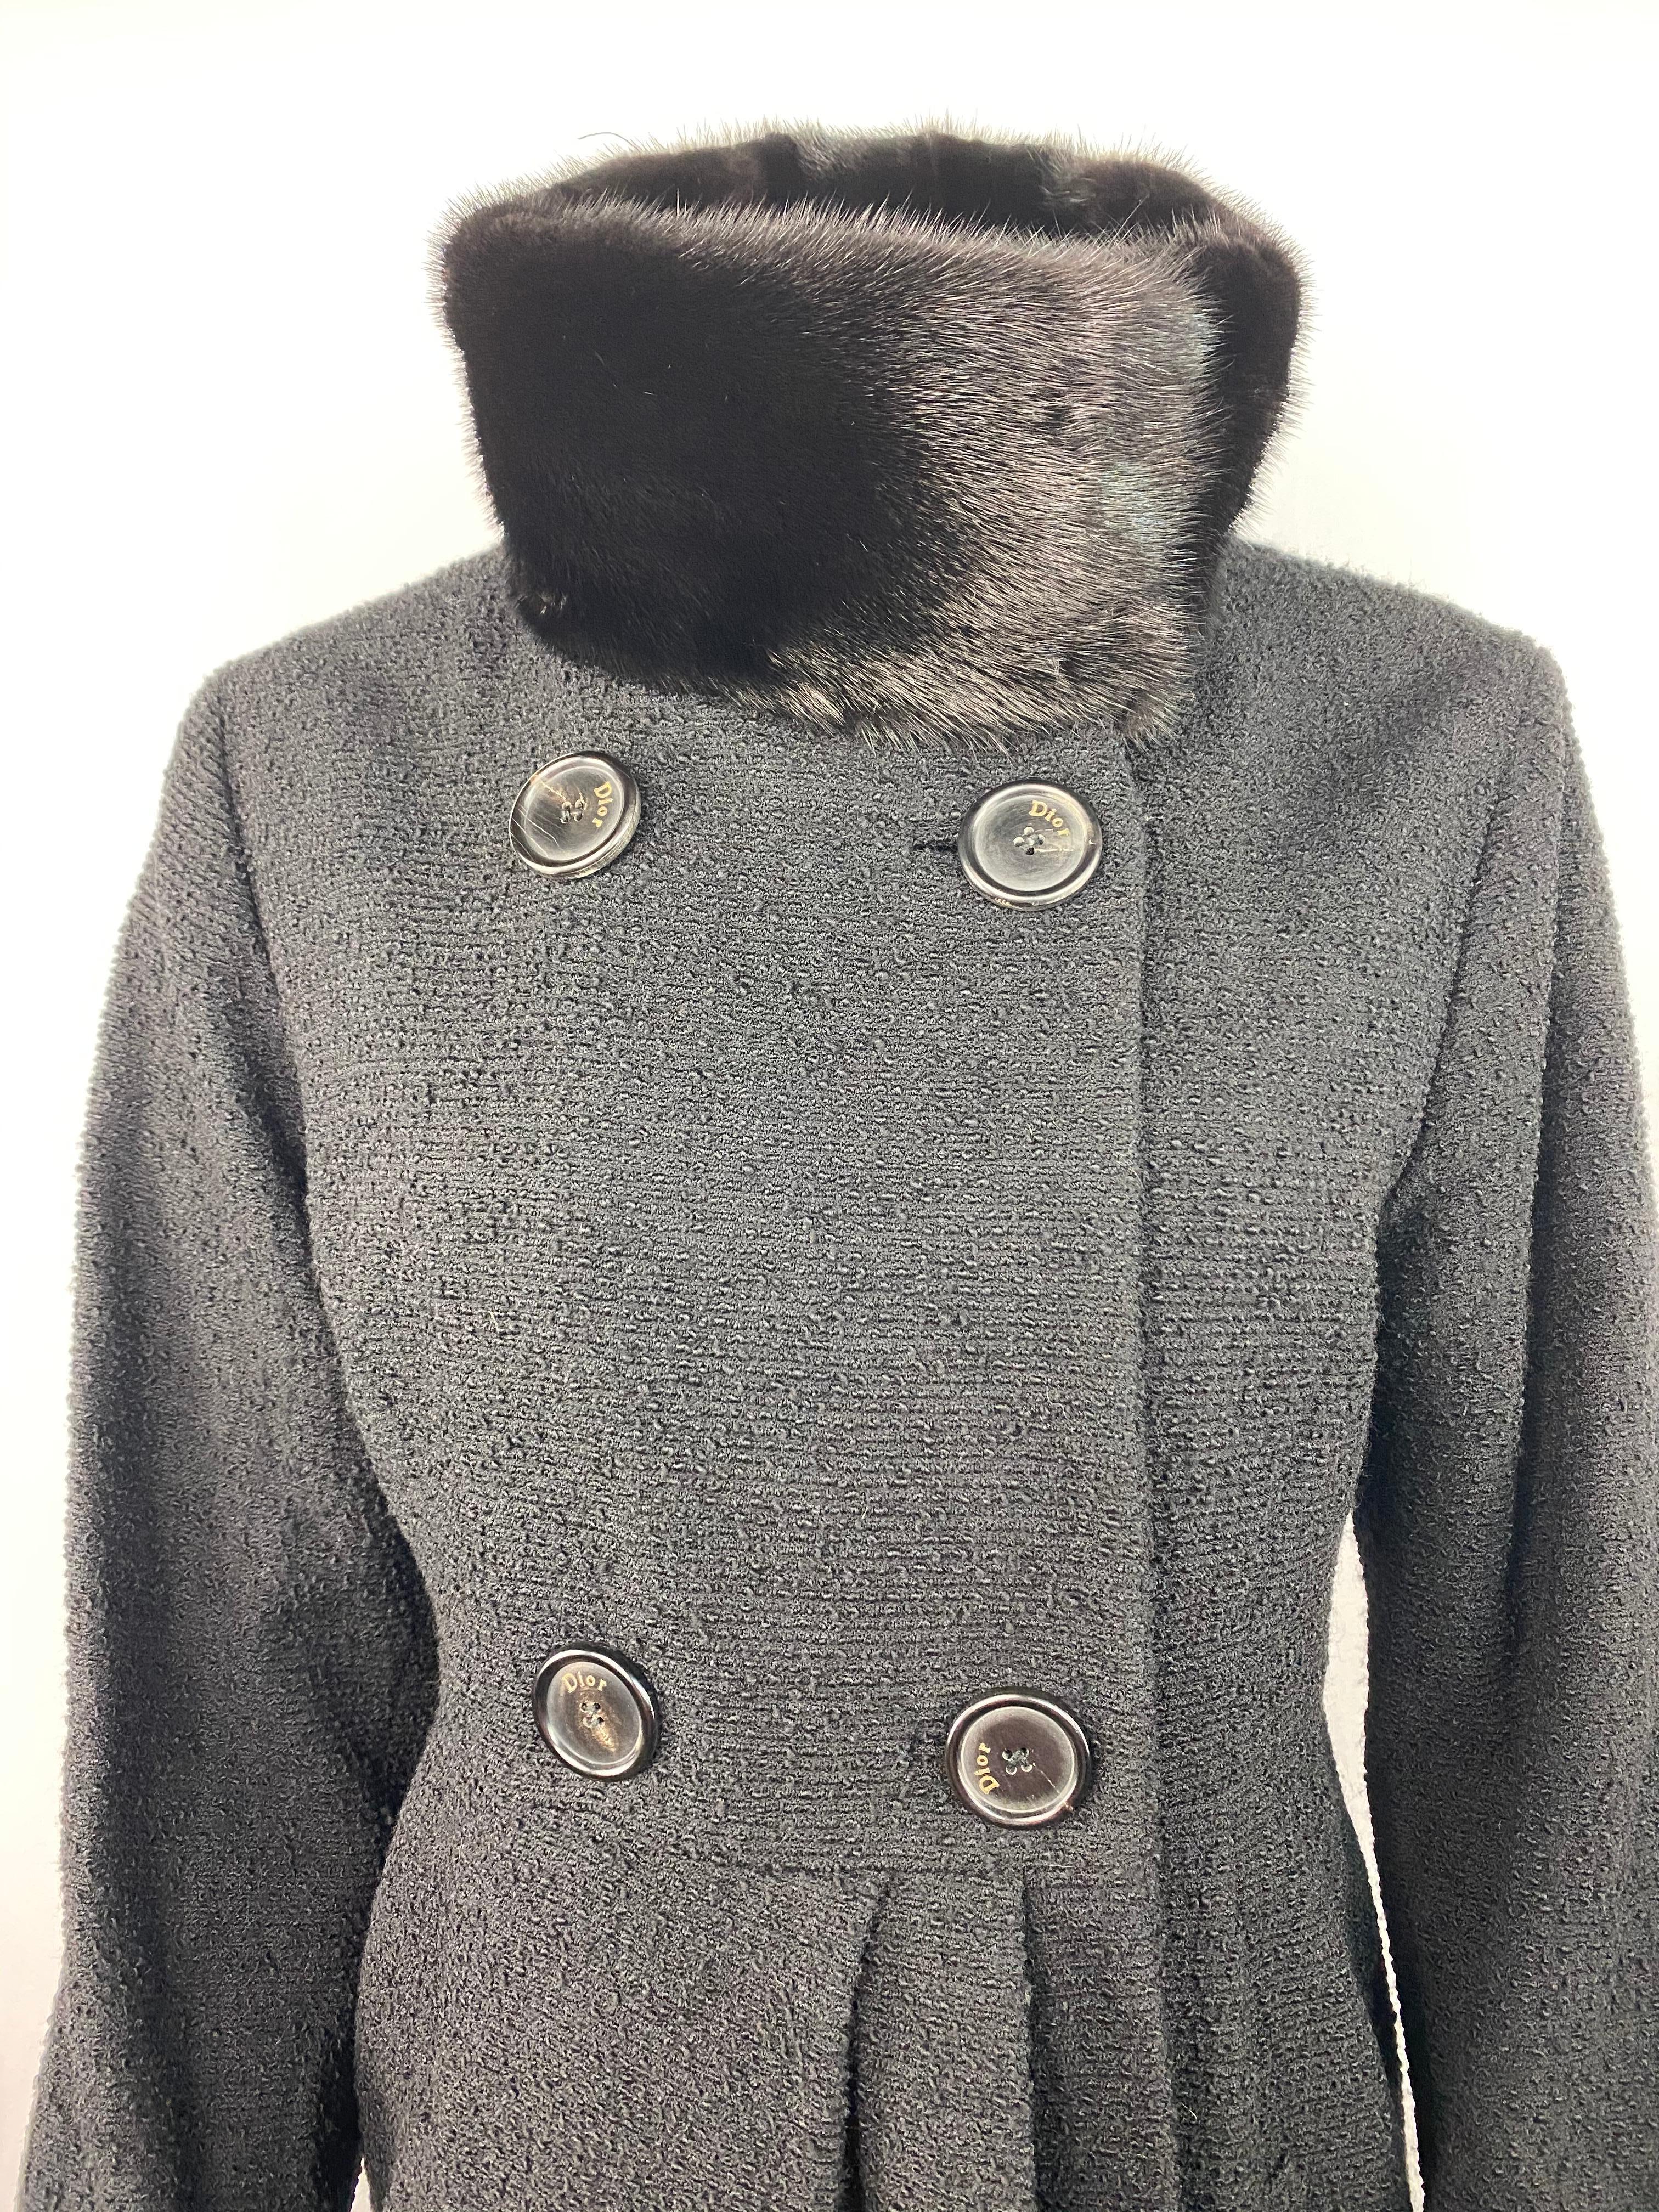 Product details:

Size FR 40, US 8.
Featuring 97% pure virgin wool in black color and 100% mink fur collar detail, tweed style and lightweight fabric with four black large Dior stamped buttons closure and pocket on each side.
Made in France.